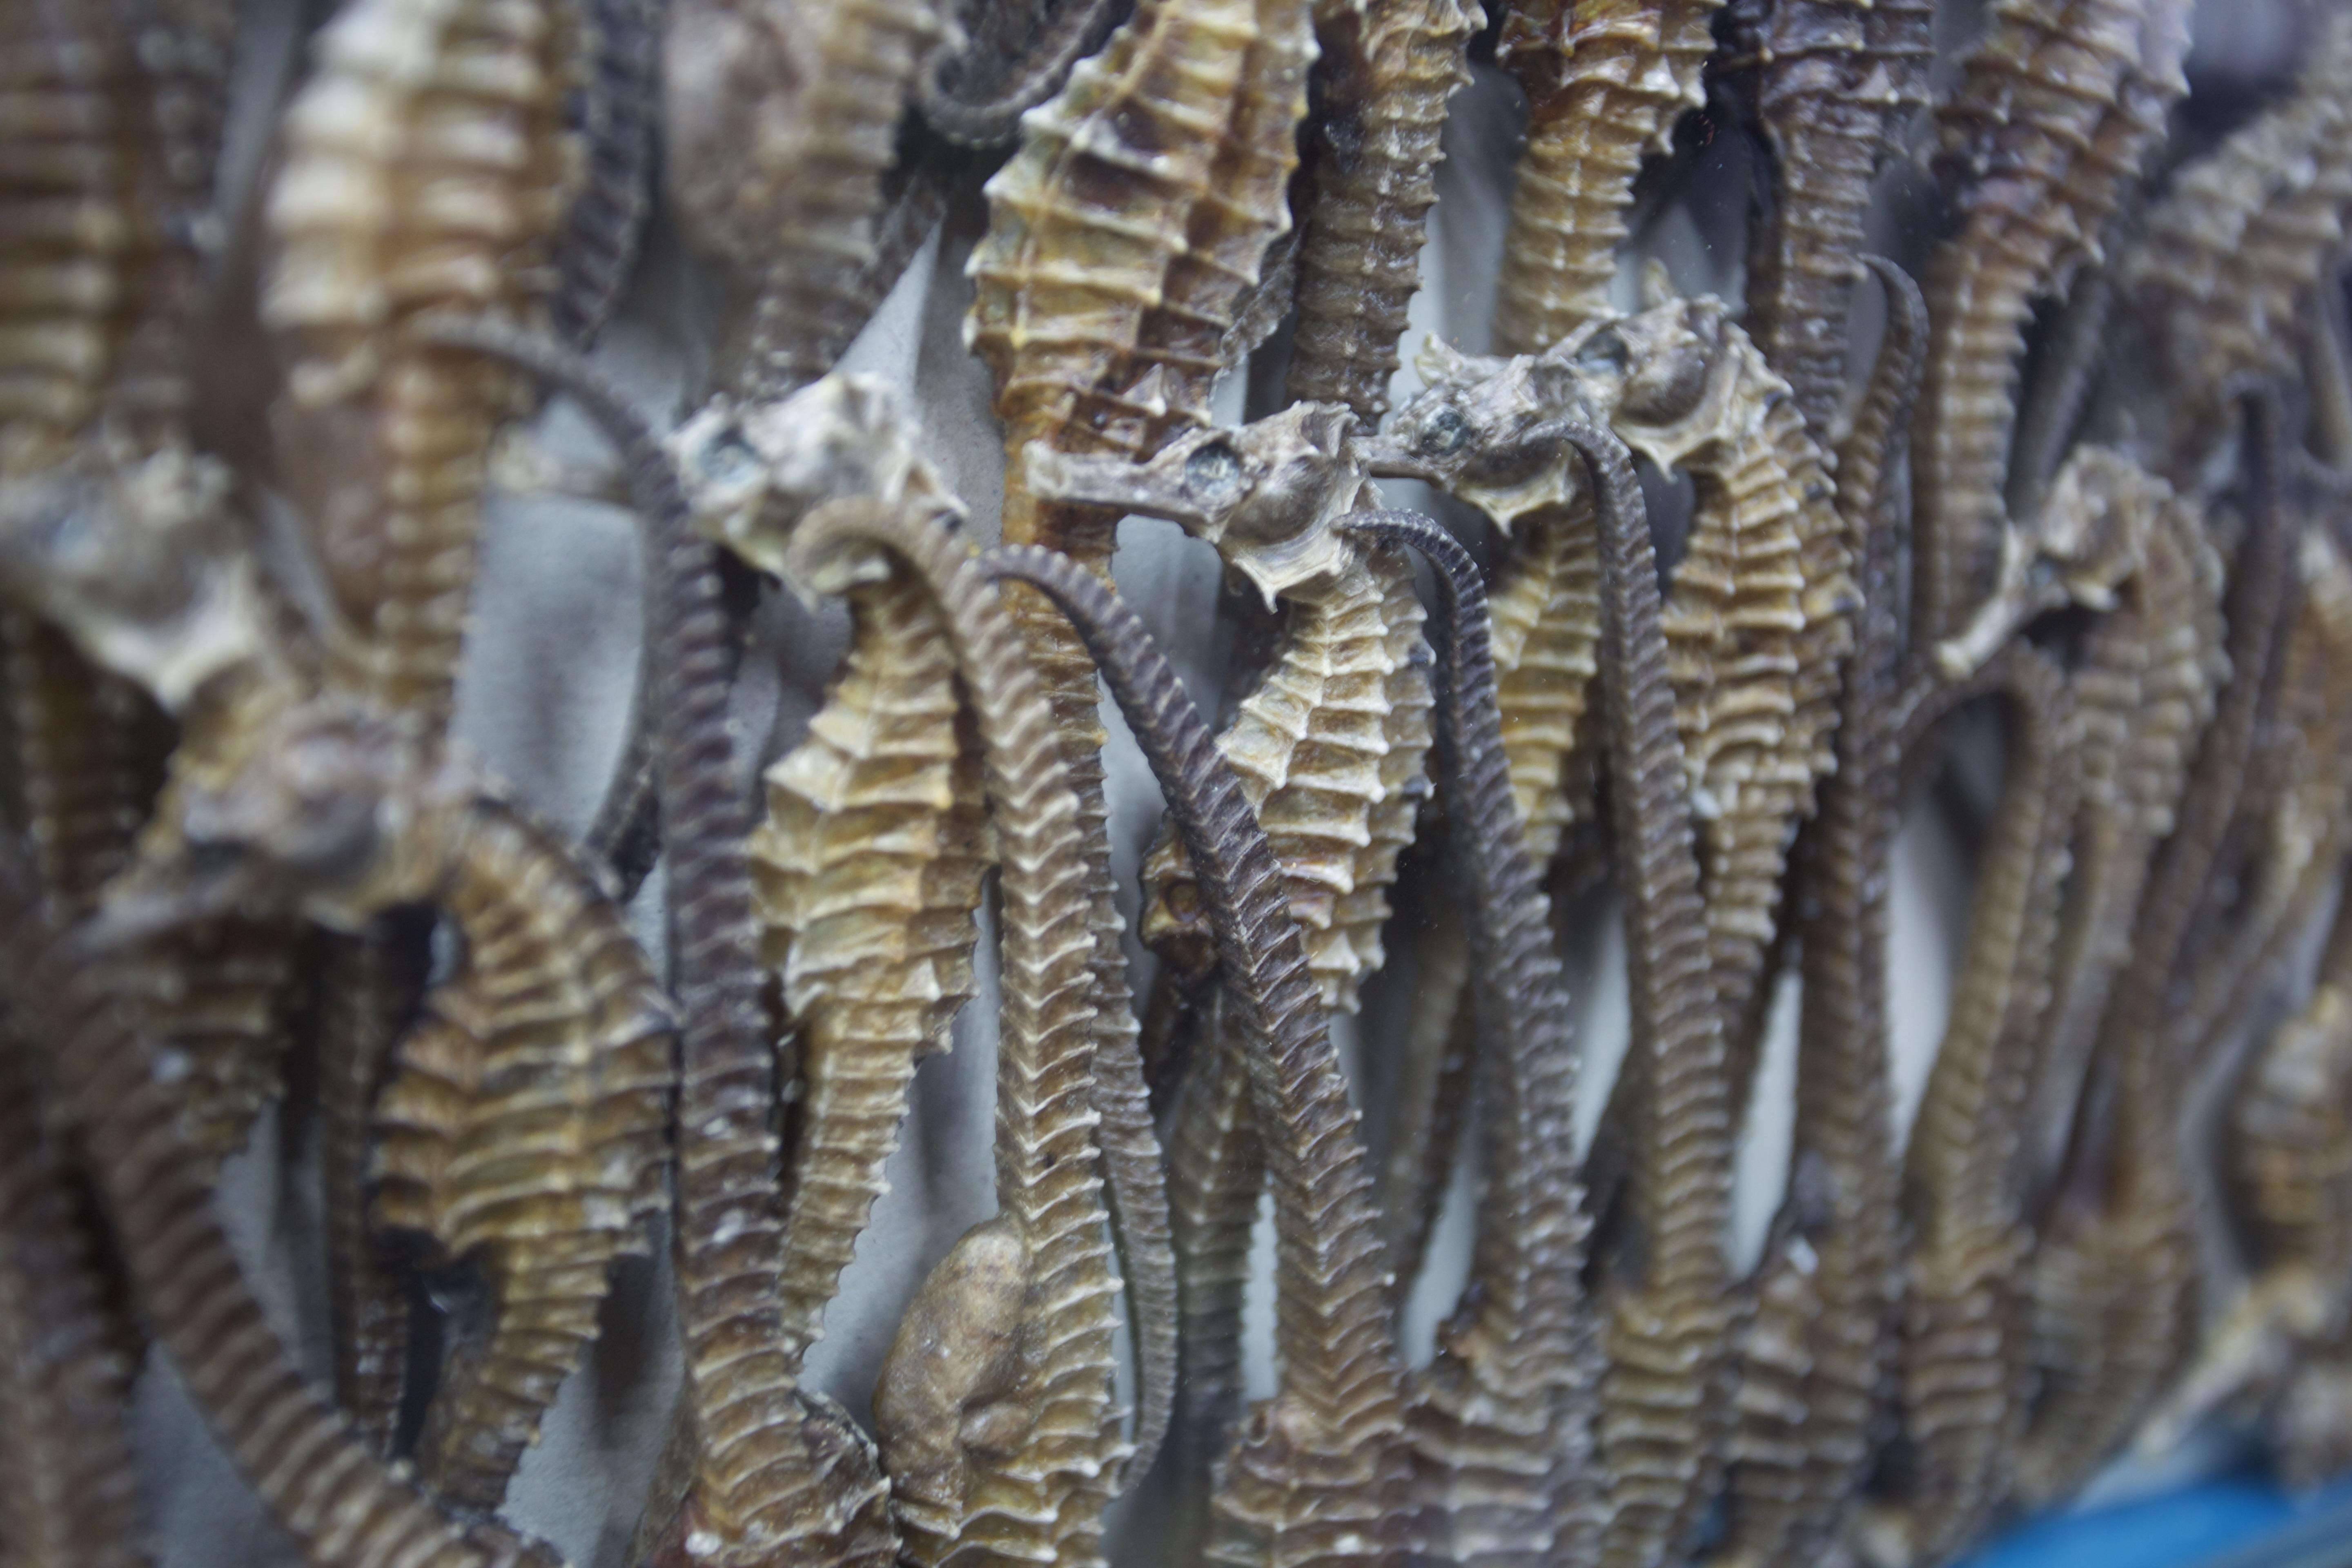 Seahorses being sold at a dry seafood store in Hong Kong